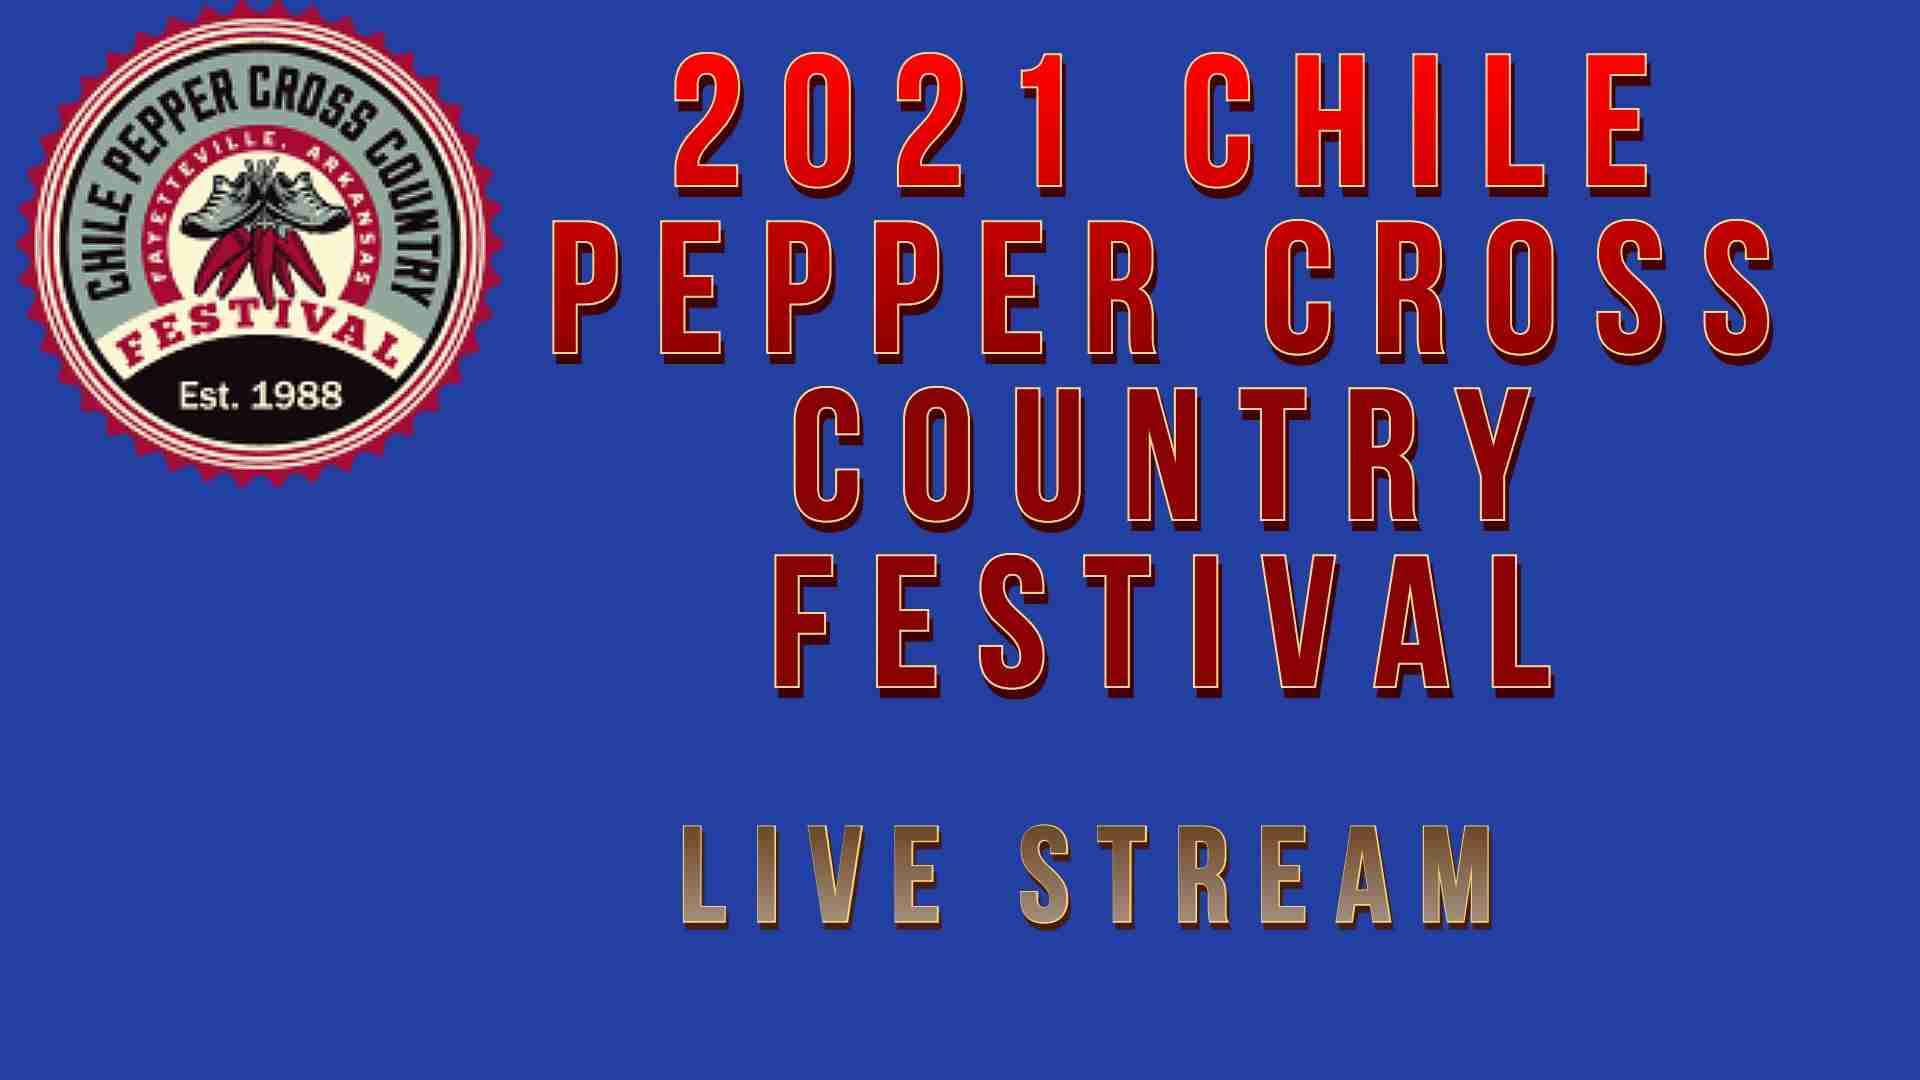 How to watch the 2021 Chile Pepper Cross Country Festival